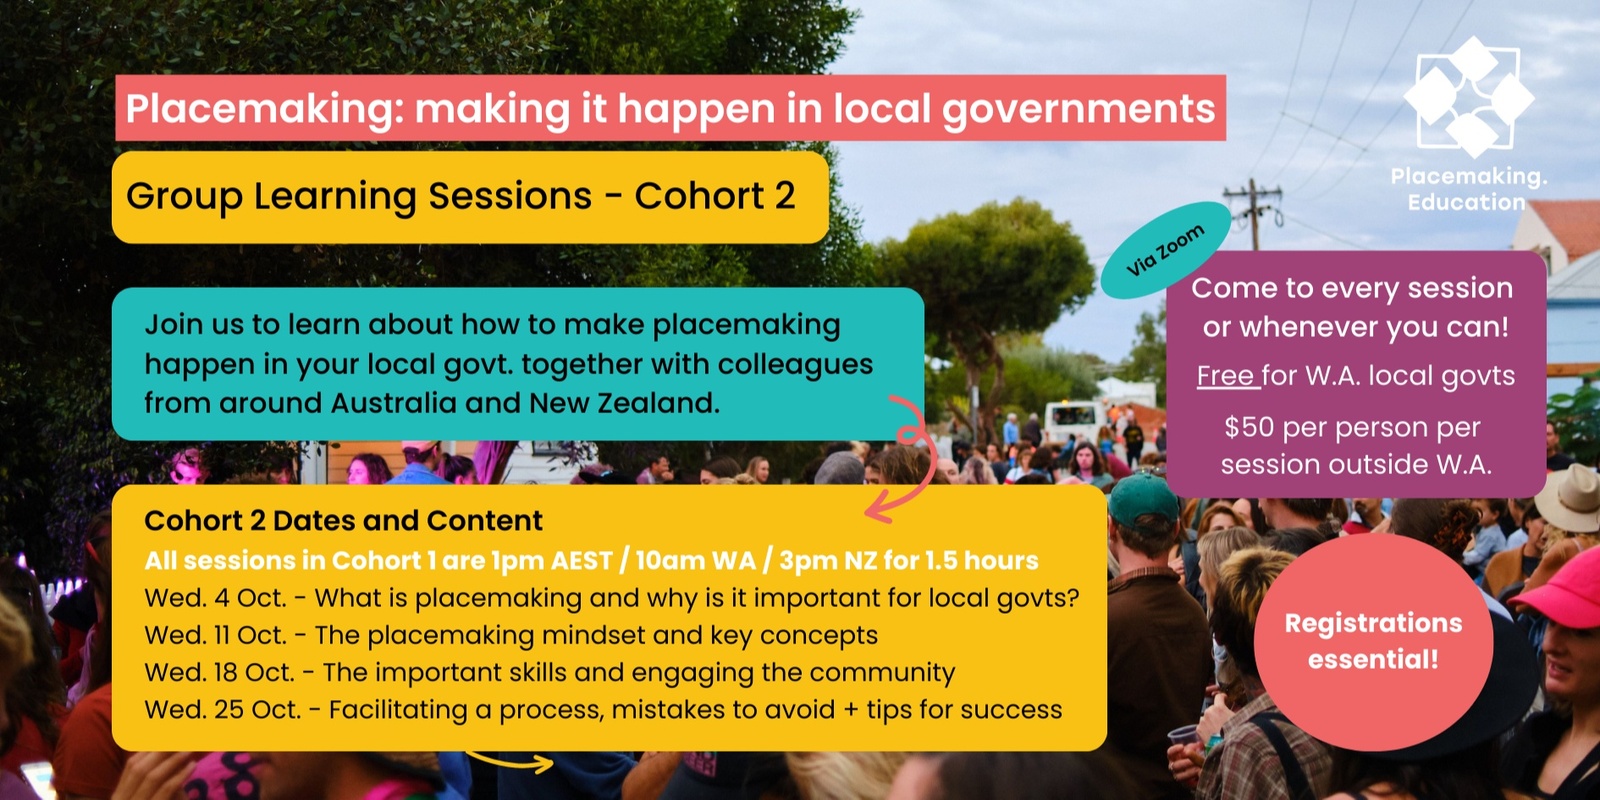 Banner image for Placemaking: making it happen in local governments group learning sessions COHORT 2